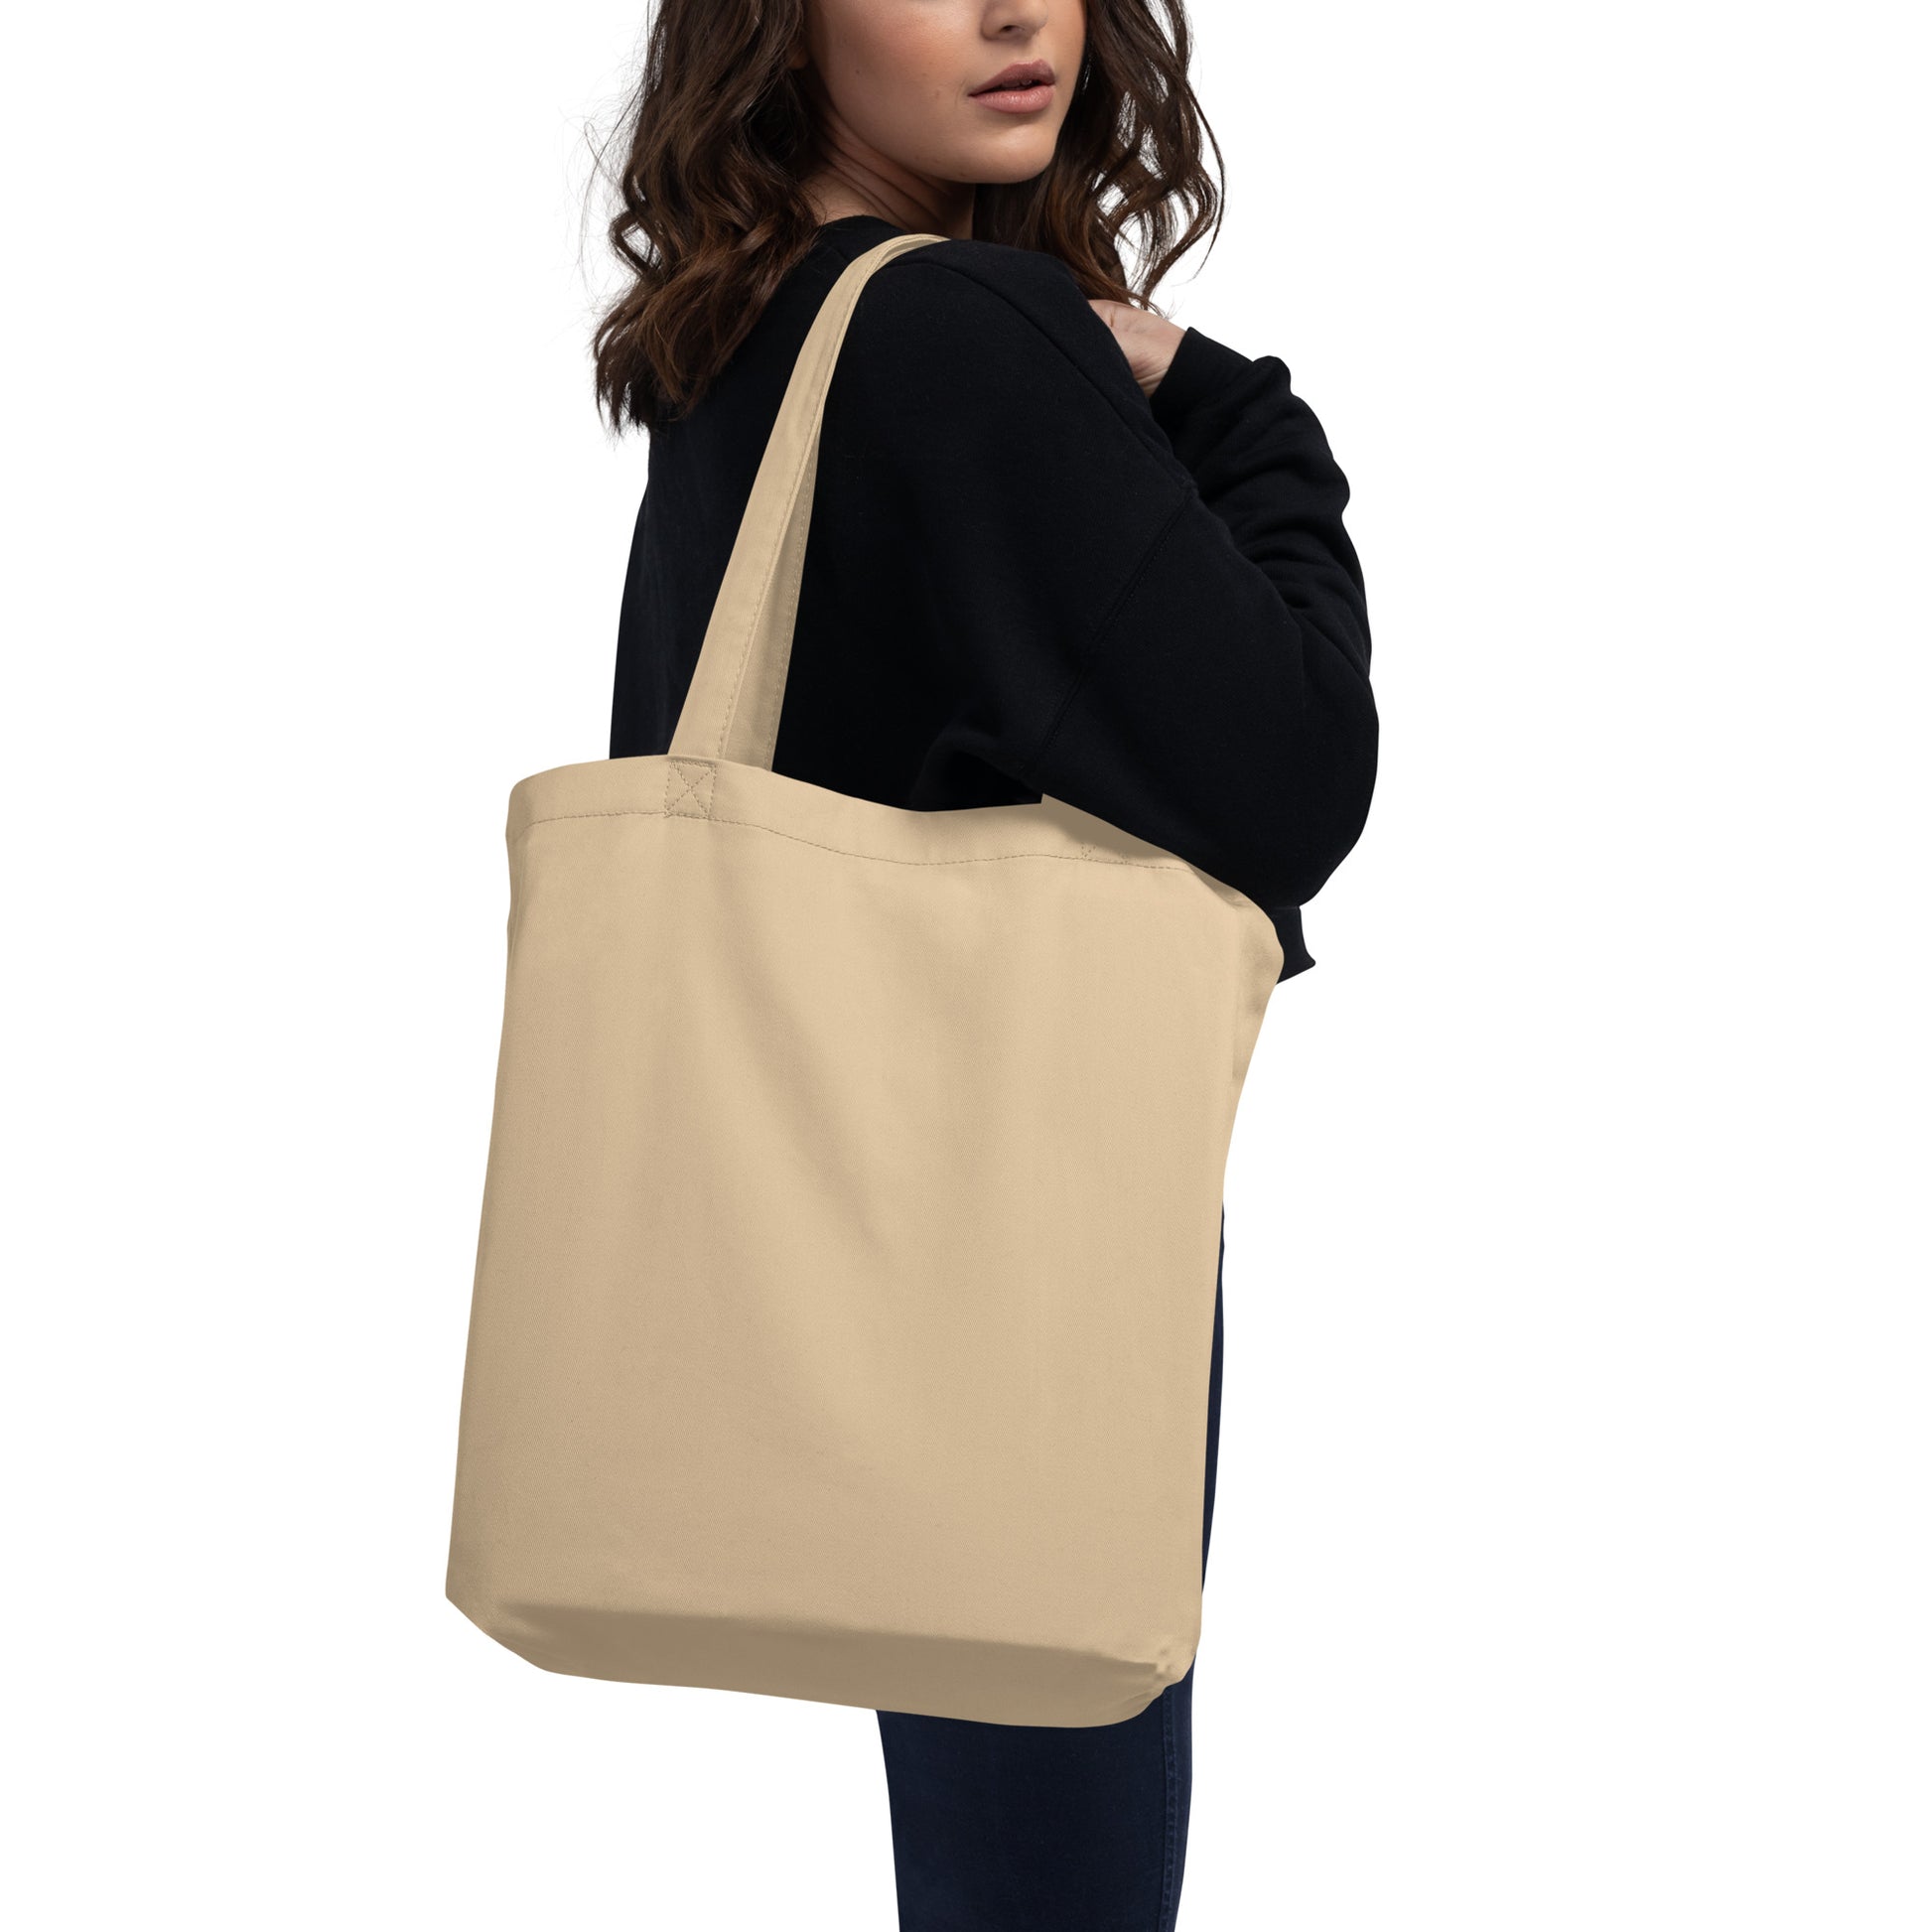 Aviation Gift Organic Tote - Black • FCO Rome • YHM Designs - Image 06